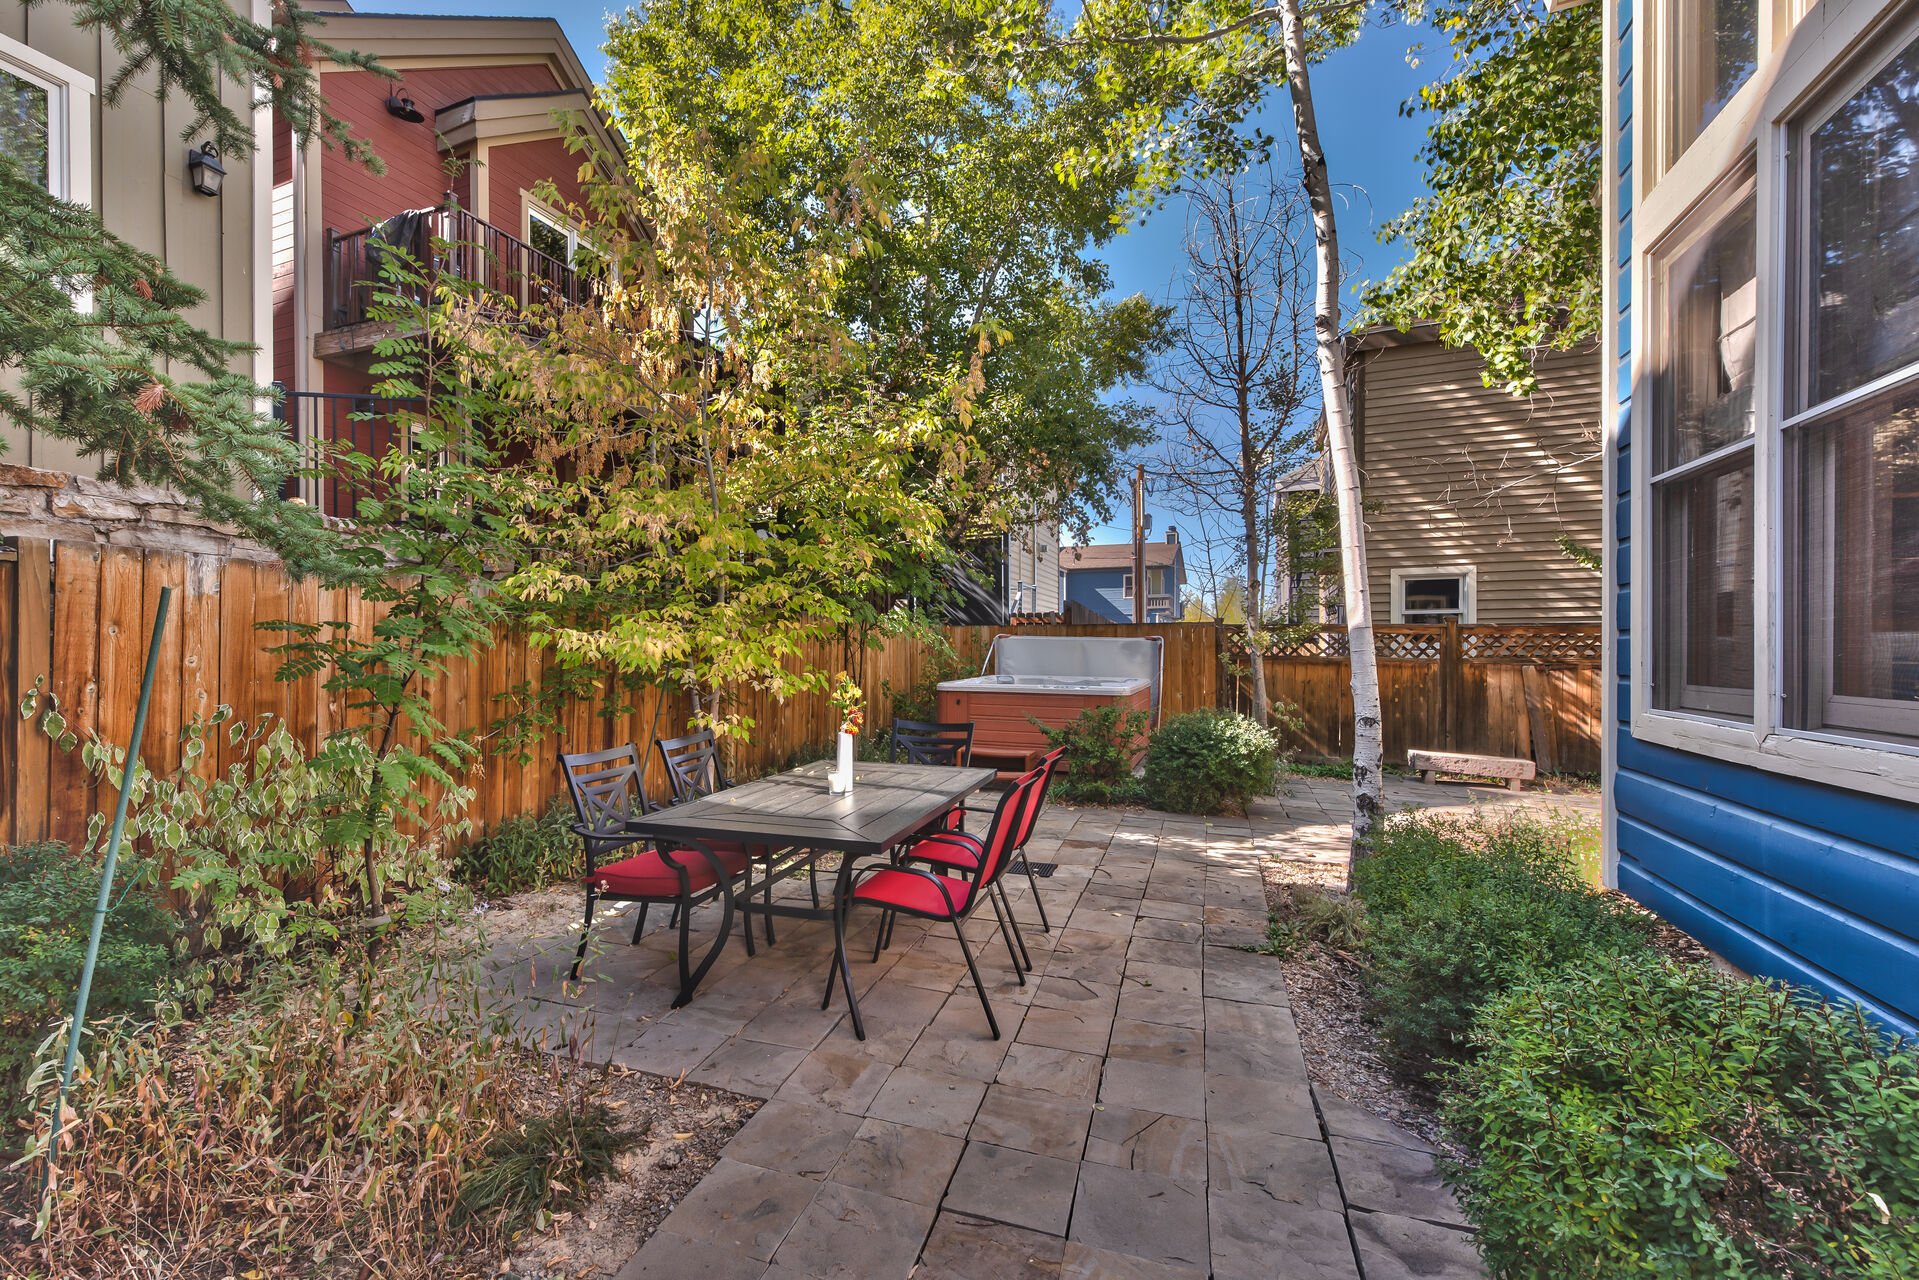 Private Back Yard with Hot Tub, BBQ Grill and Patio Seating